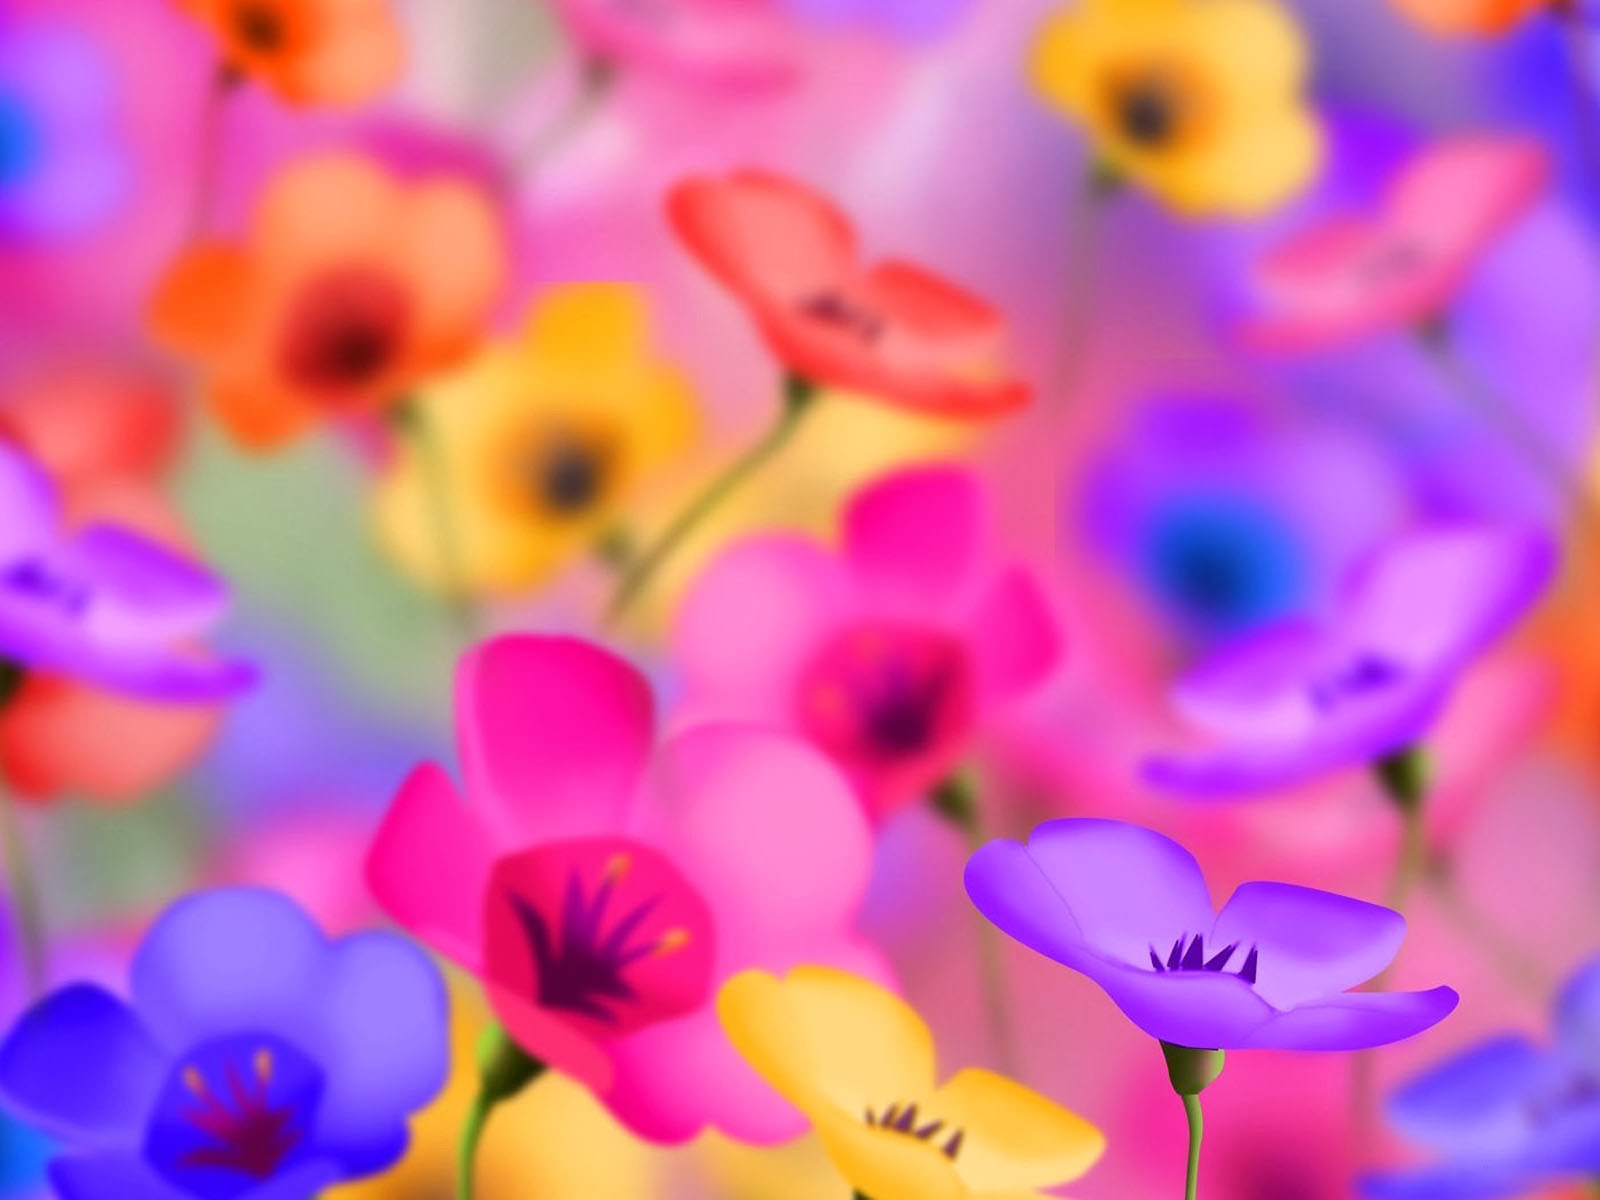 Tag 3d Flowers Wallpaper Background Photos Image Andpictures